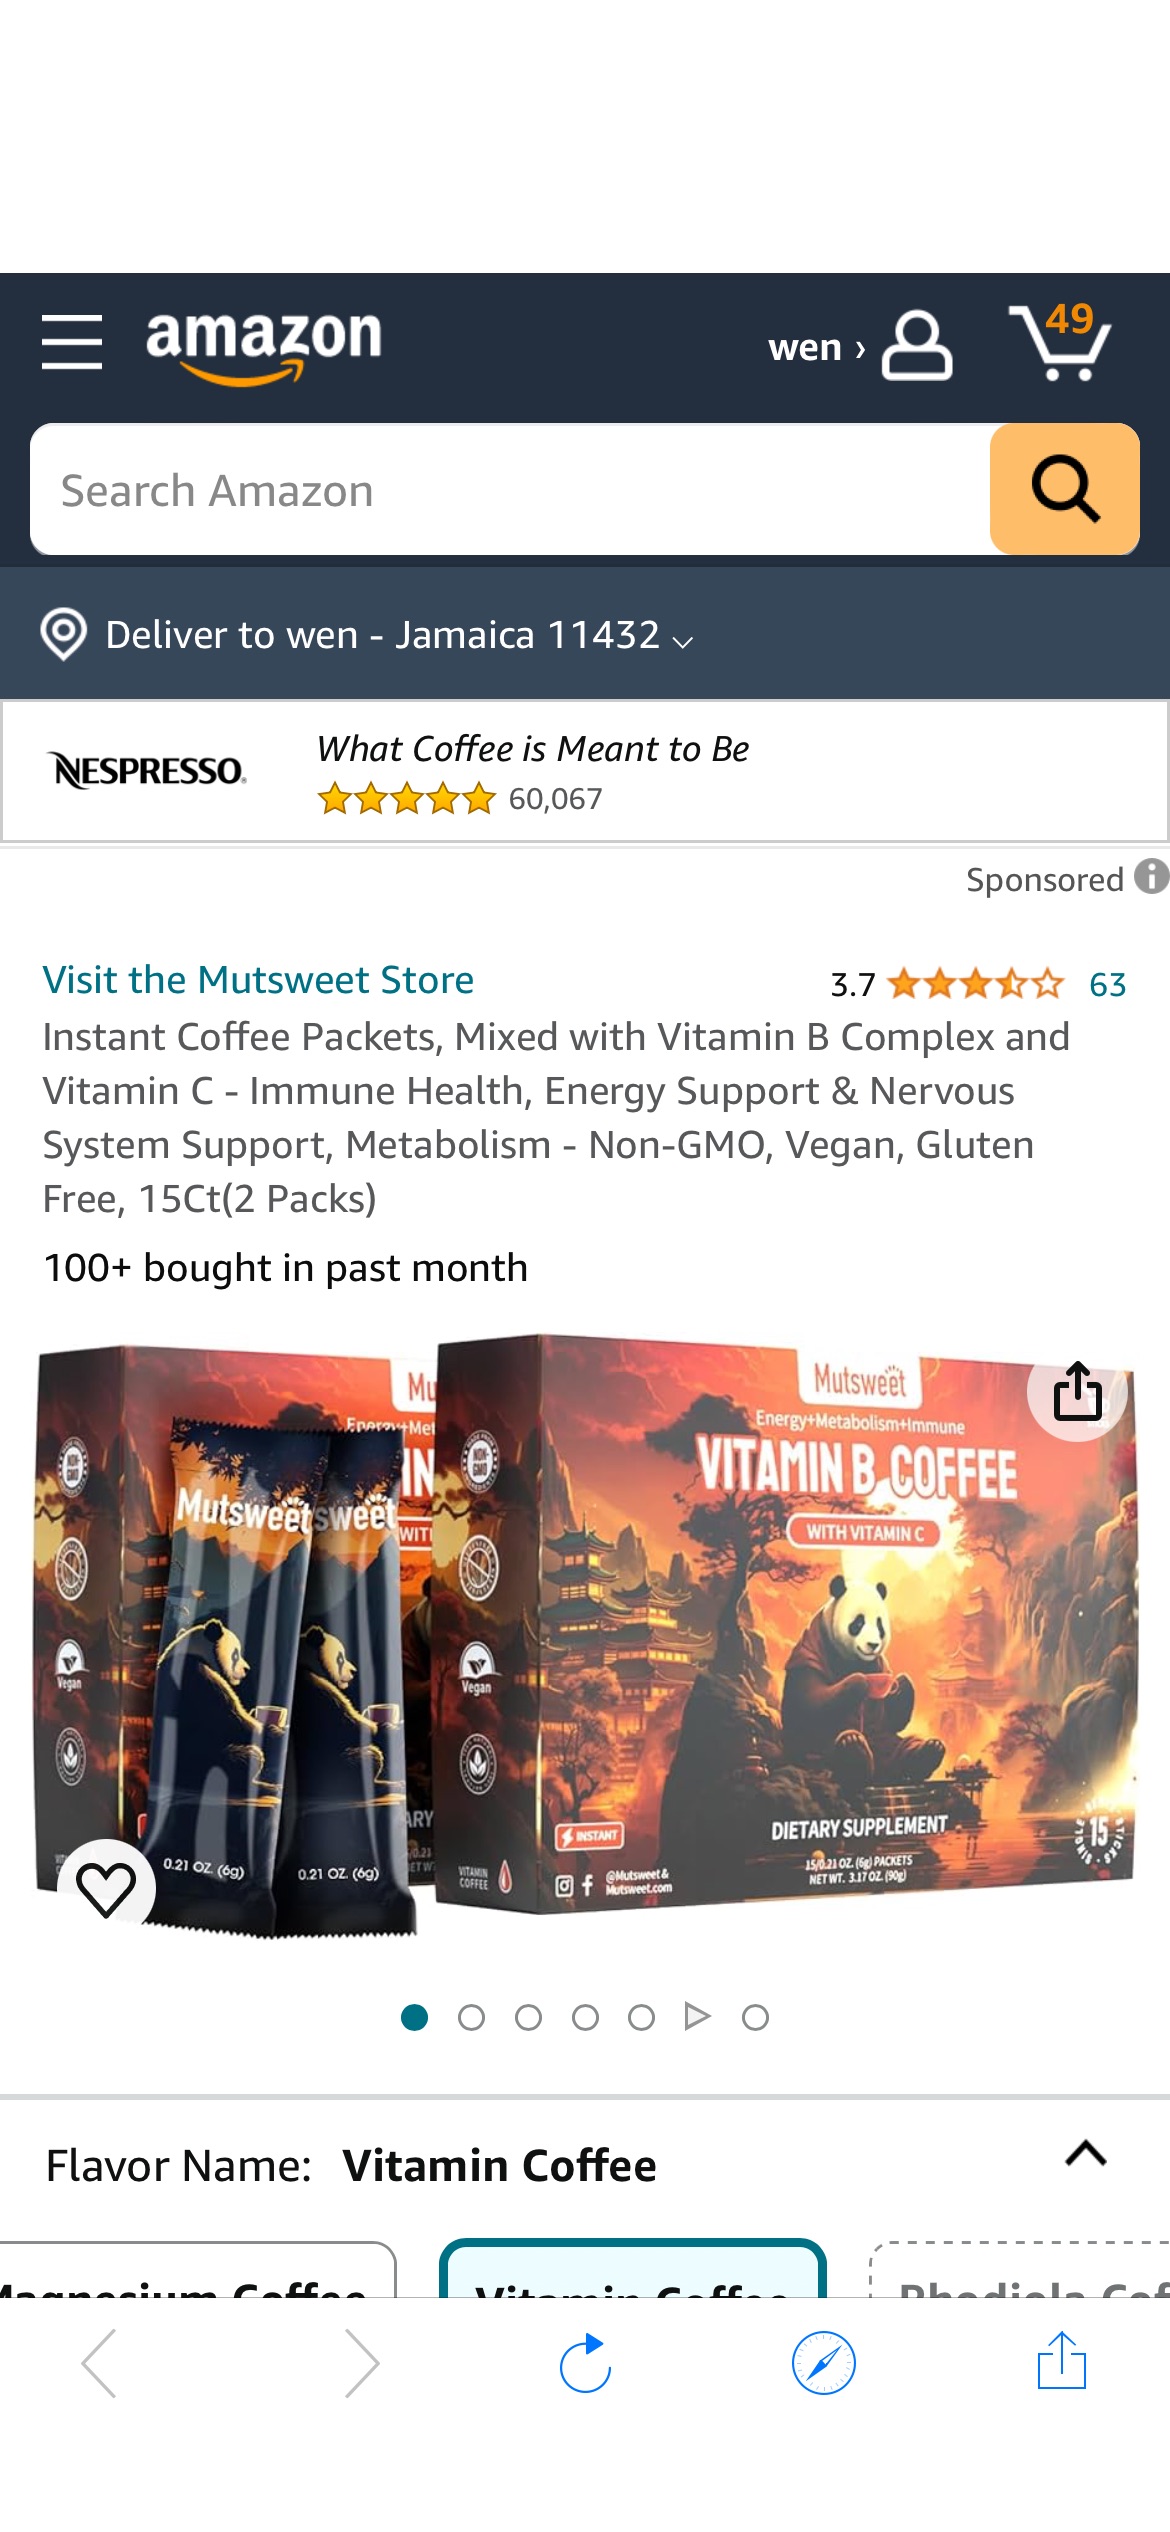 Amazon.com : Instant Coffee Packets, Mixed with Vitamin B Complex and Vitamin C - Immune Health, Energy Support & Nervous System Support, Metabolism - Non-GMO, Vegan, Gluten Free, 15Ct(2 Packs) : Groc